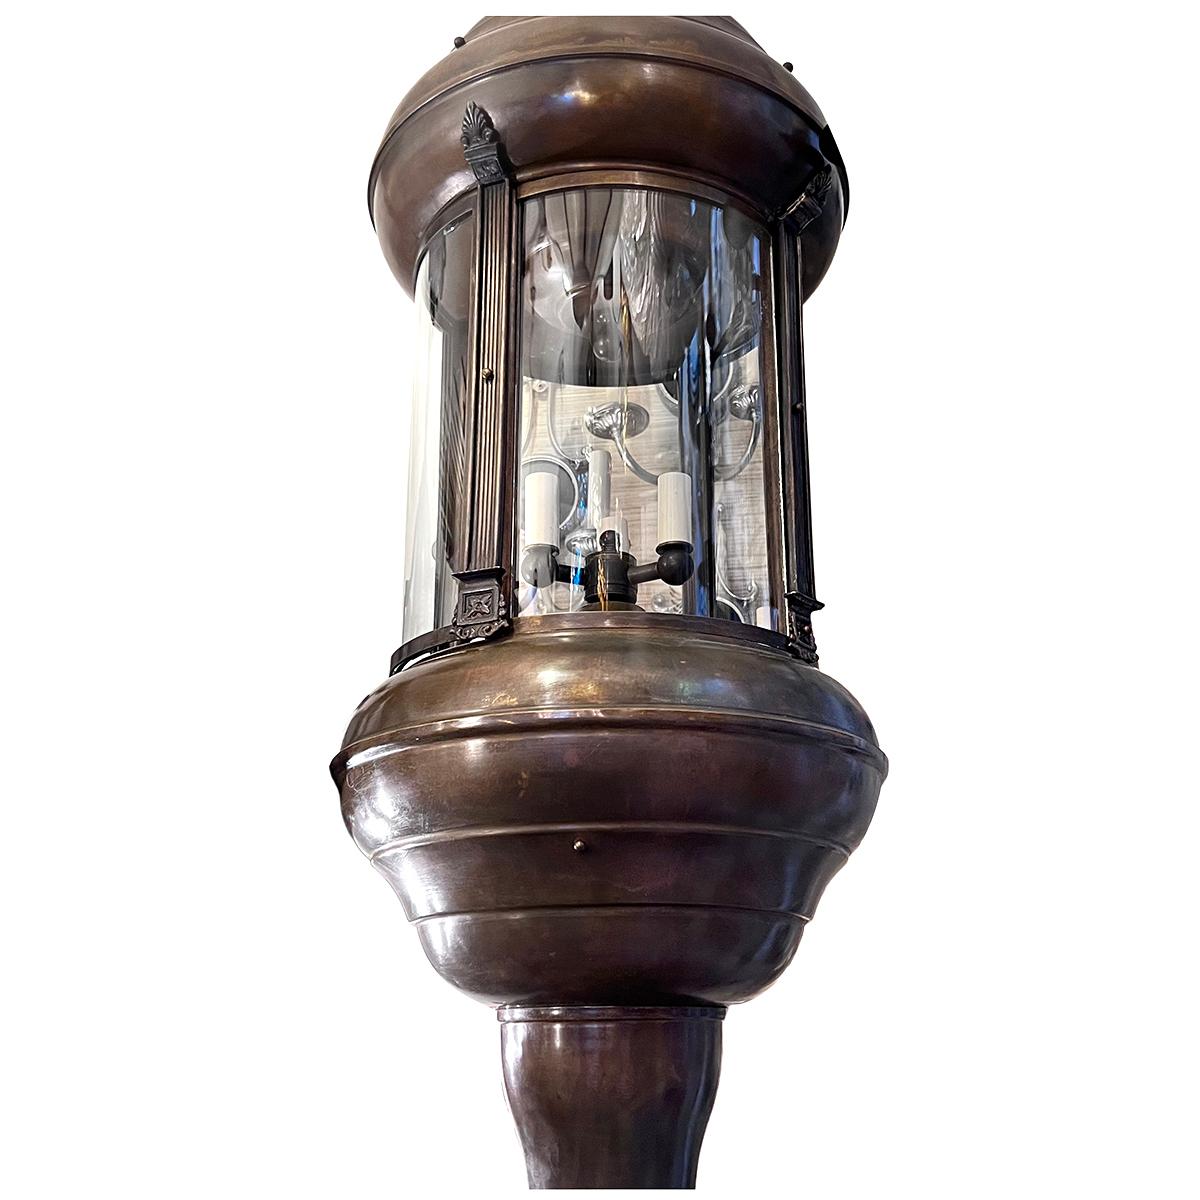 A circa 1940's patinated bronze neoclassic lantern with 3 candelabra lights.

Measurements:
Diameter: 15